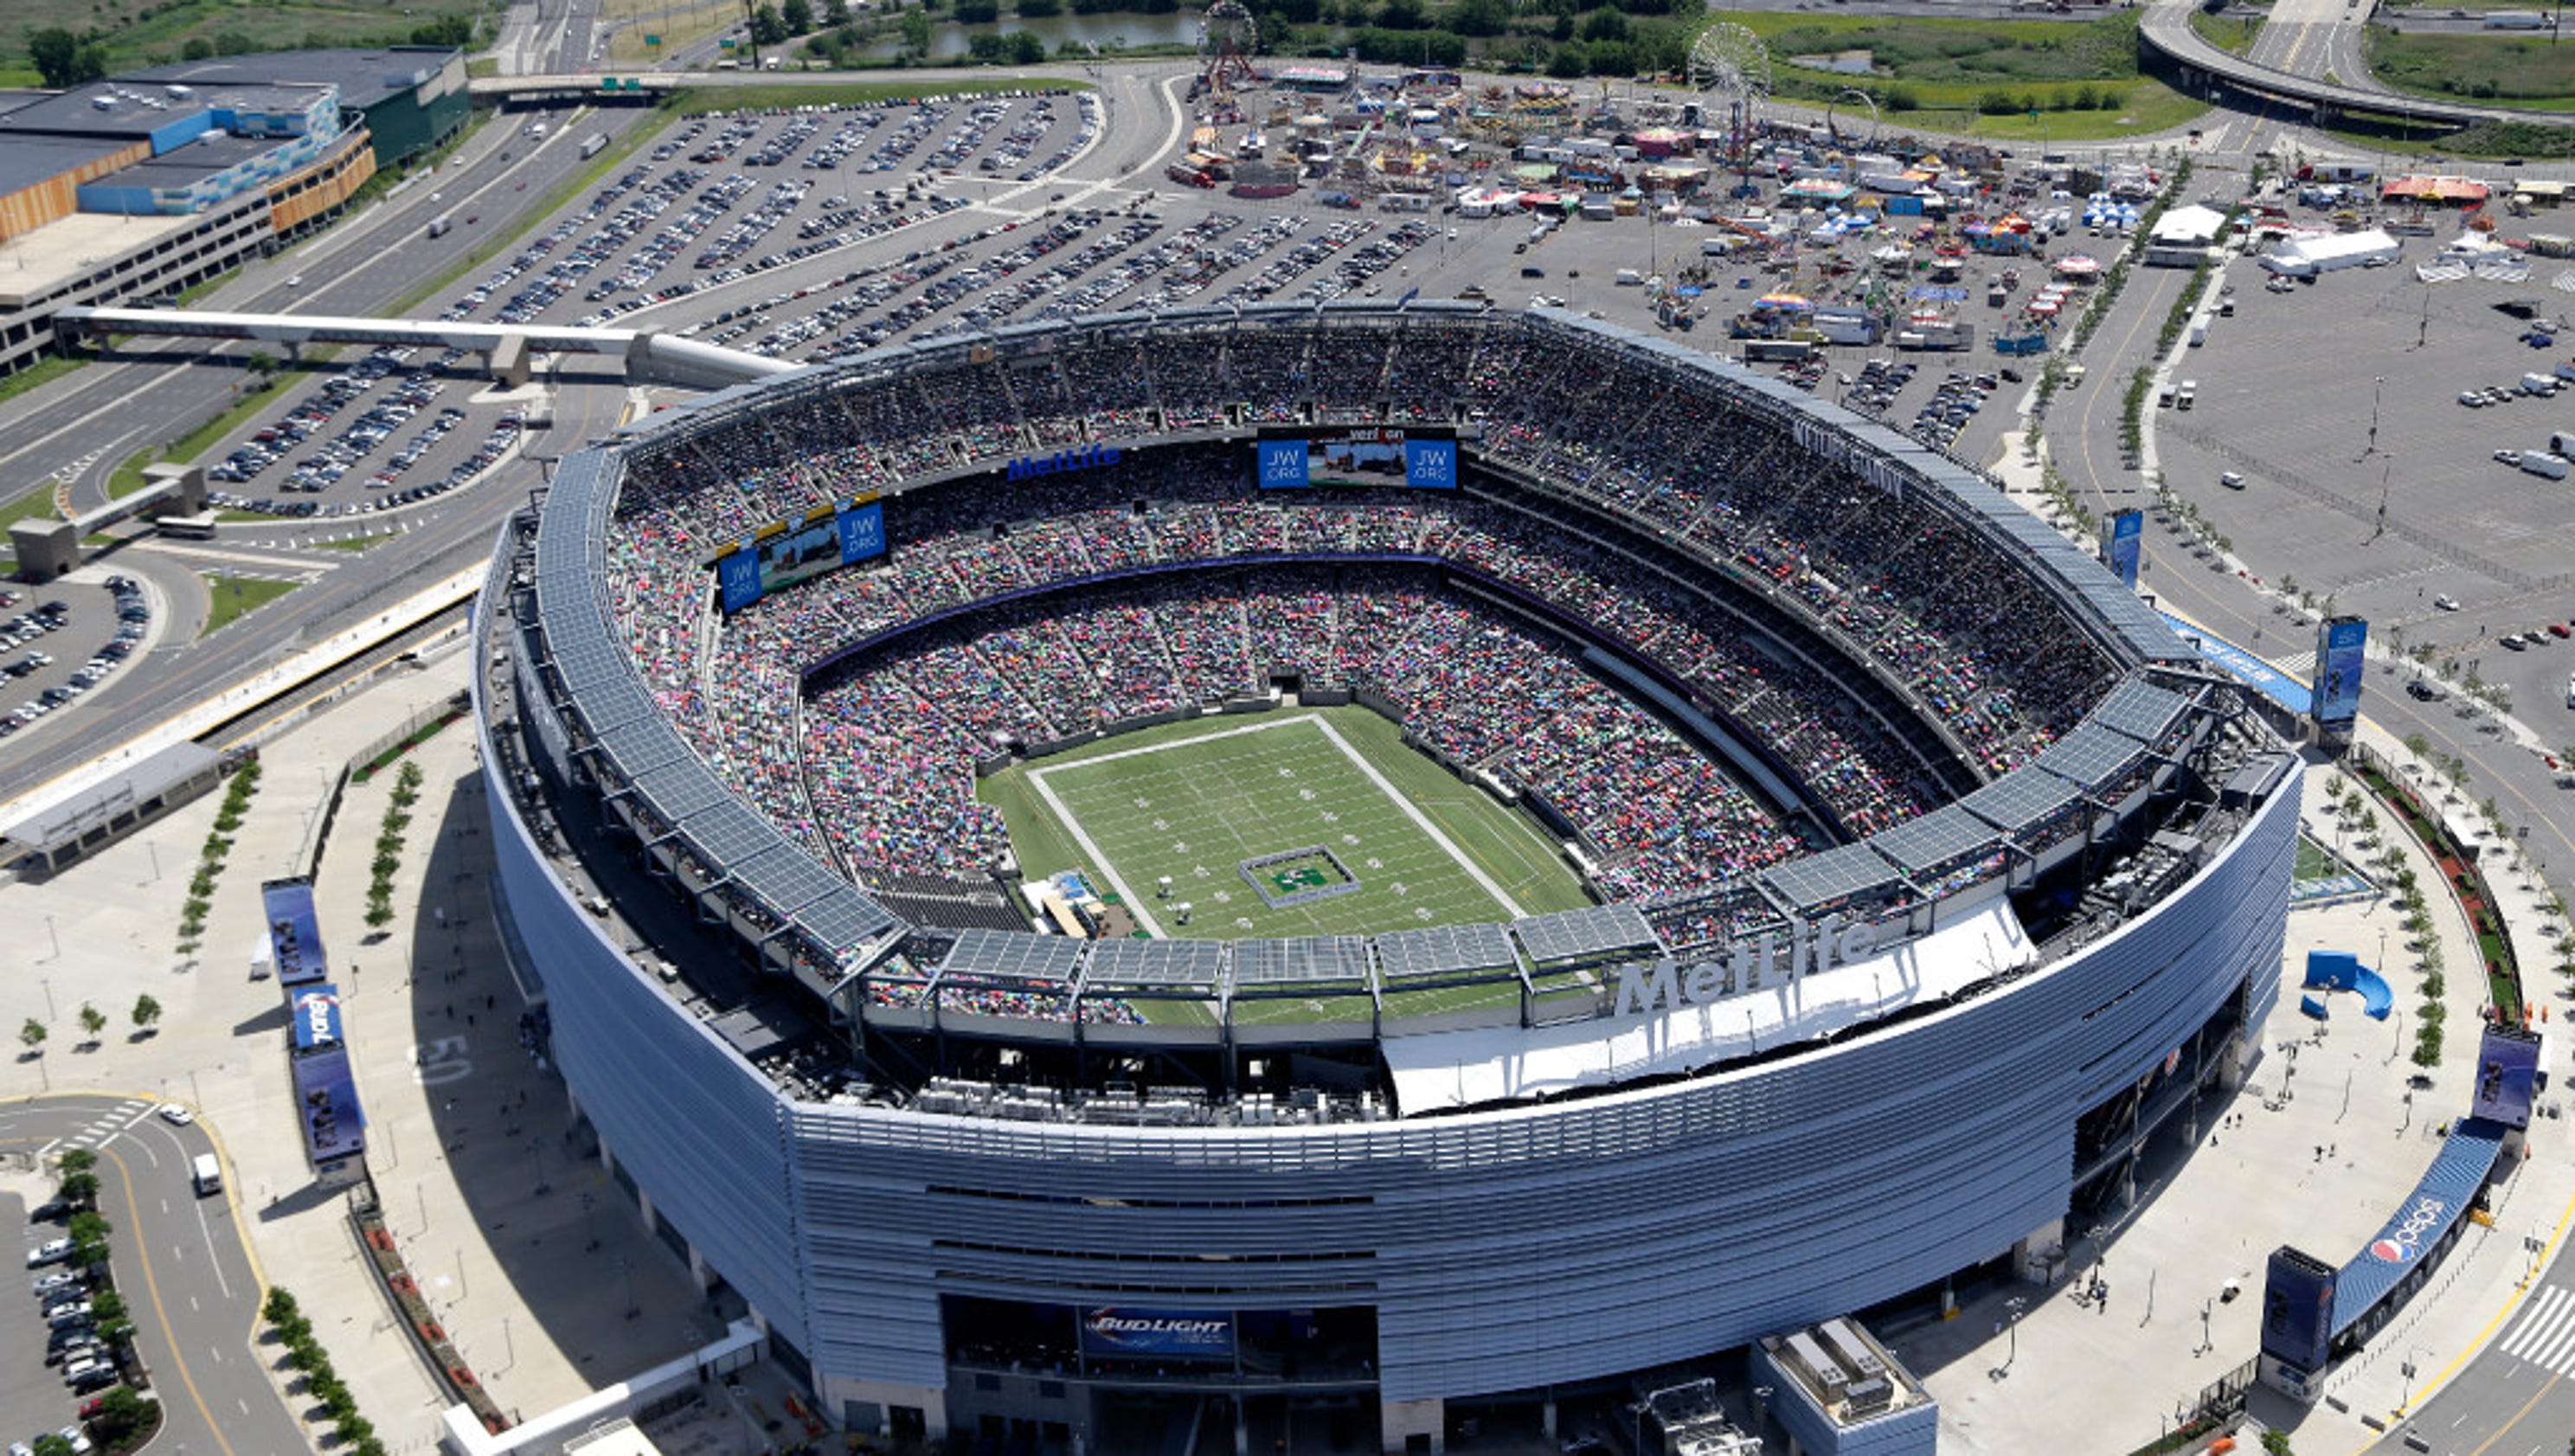 uber-signs-deal-with-metlife-stadium-to-become-official-ride-share